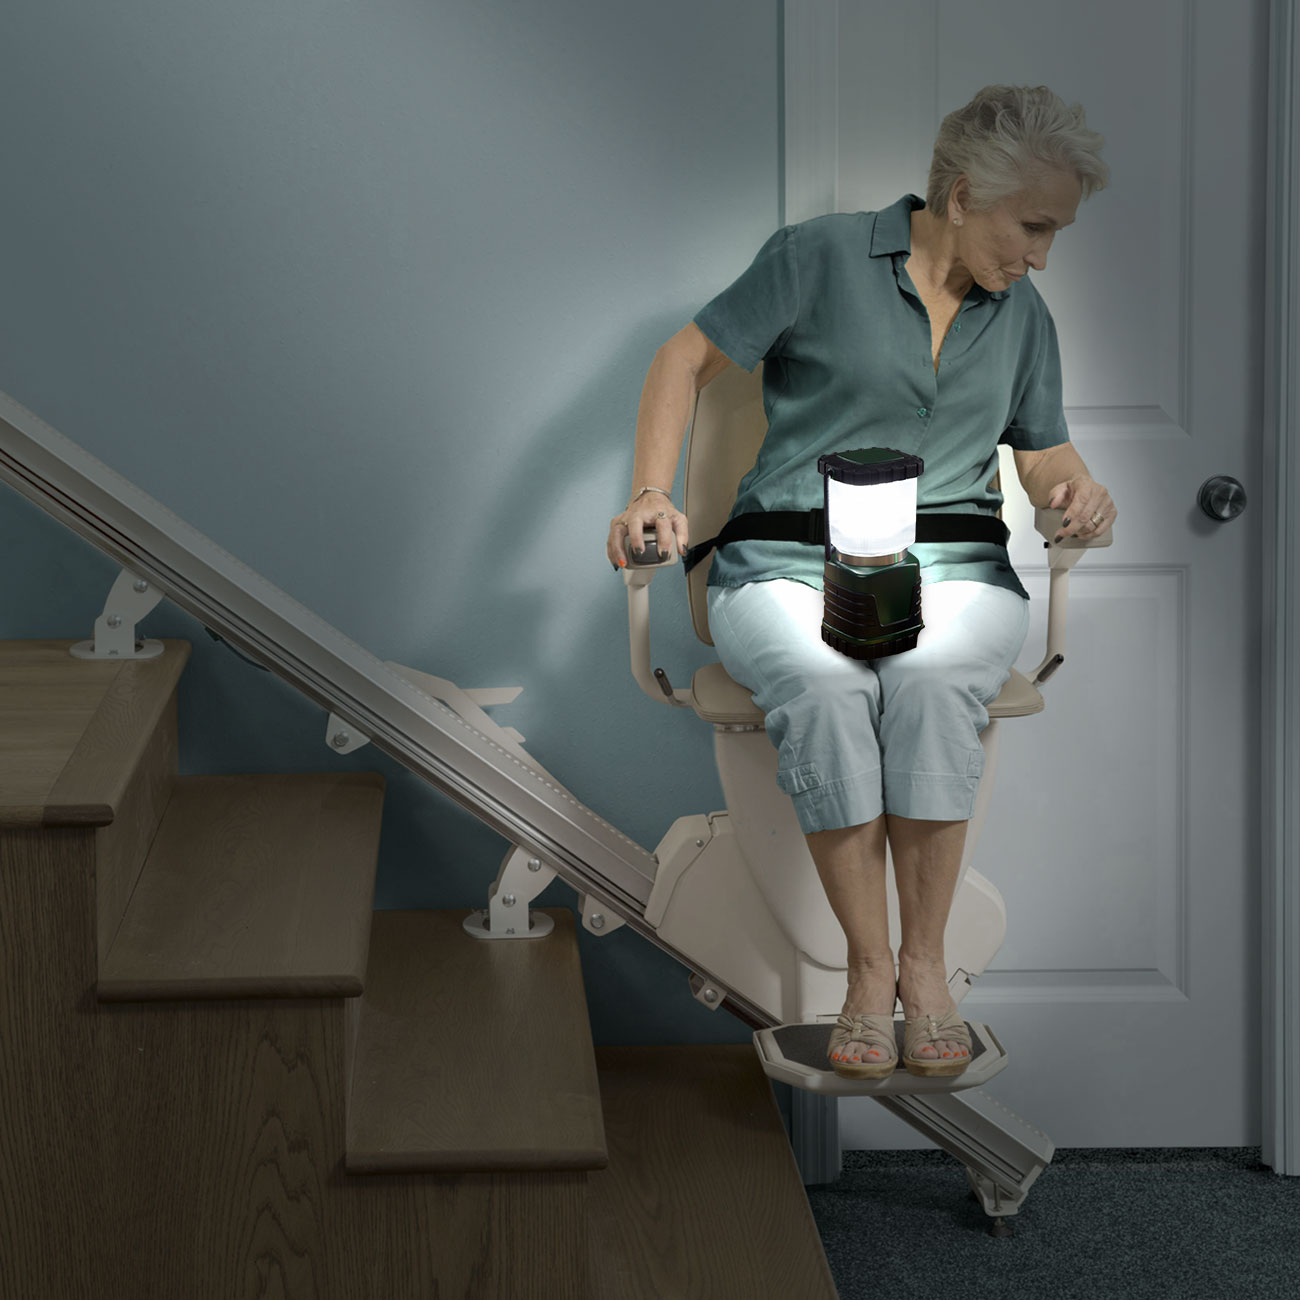 Photo describing how stair-lift will work when power is out